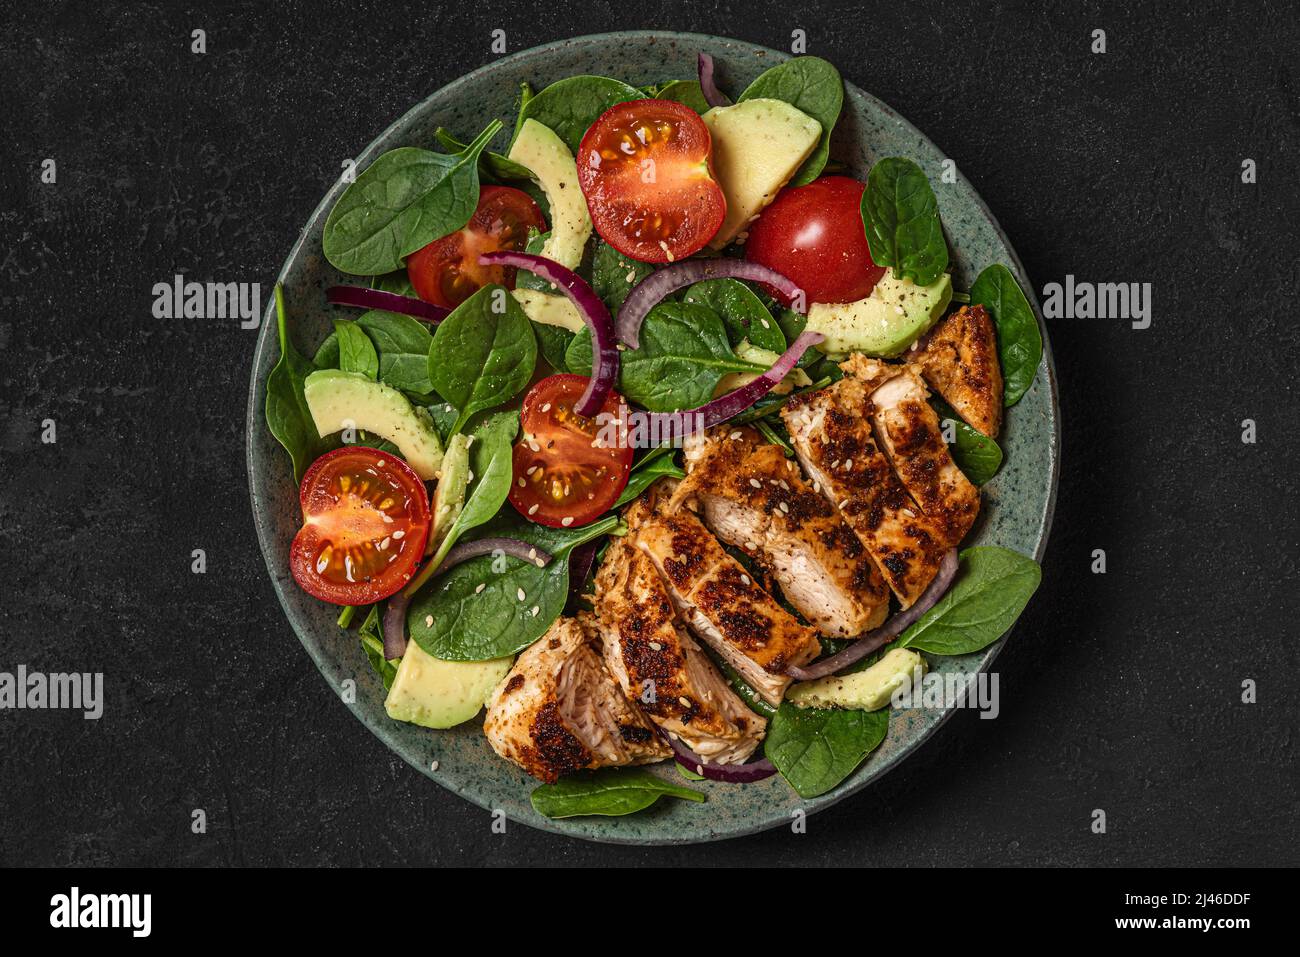 Grilled chicken breast and spinach salad with avocado, tomatoes and sesame seeds in a plate on dark background. top view Stock Photo